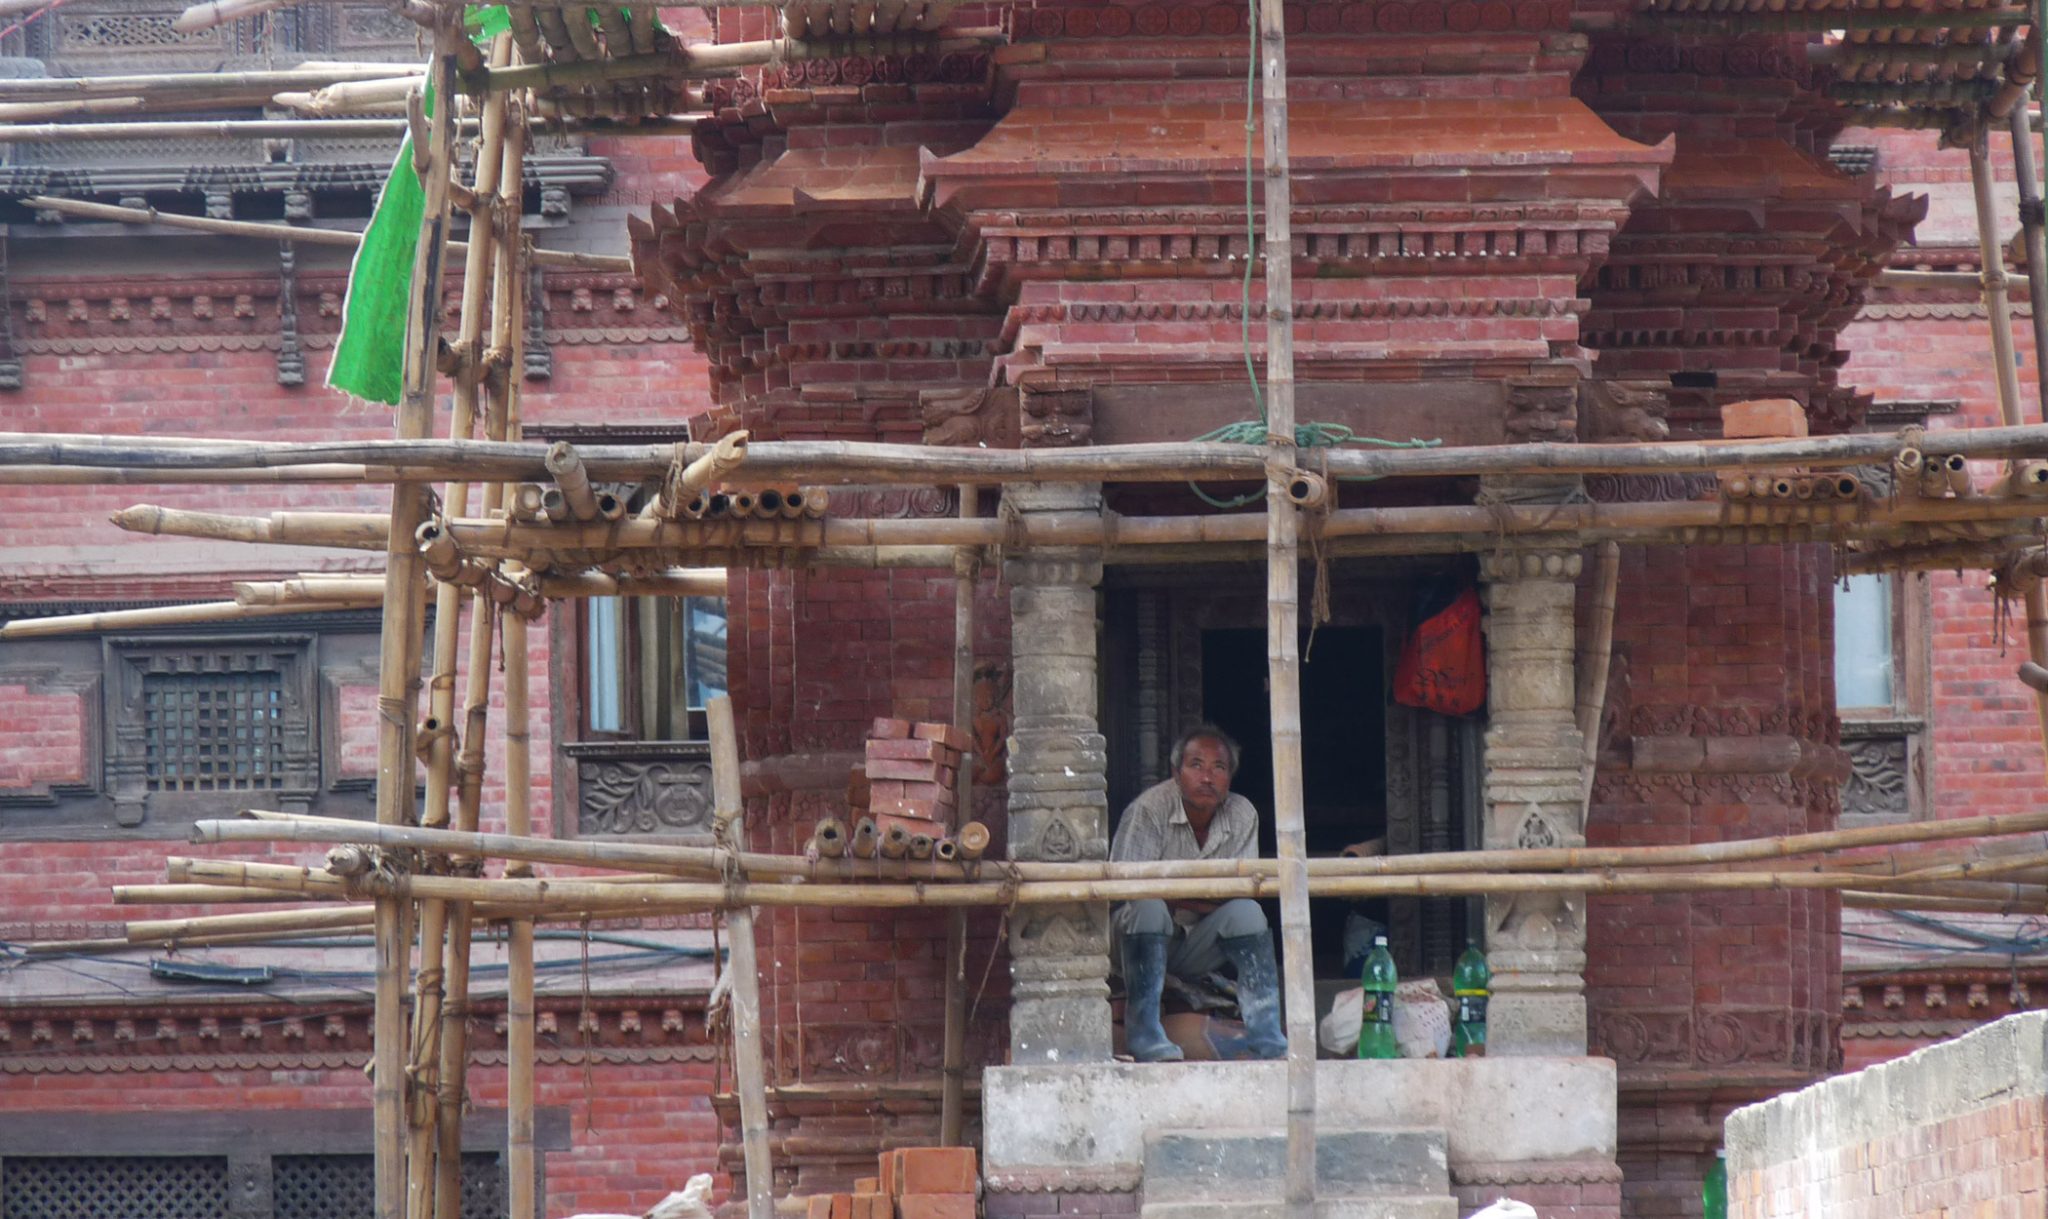 A man sits in the damaged entrance to a temple.